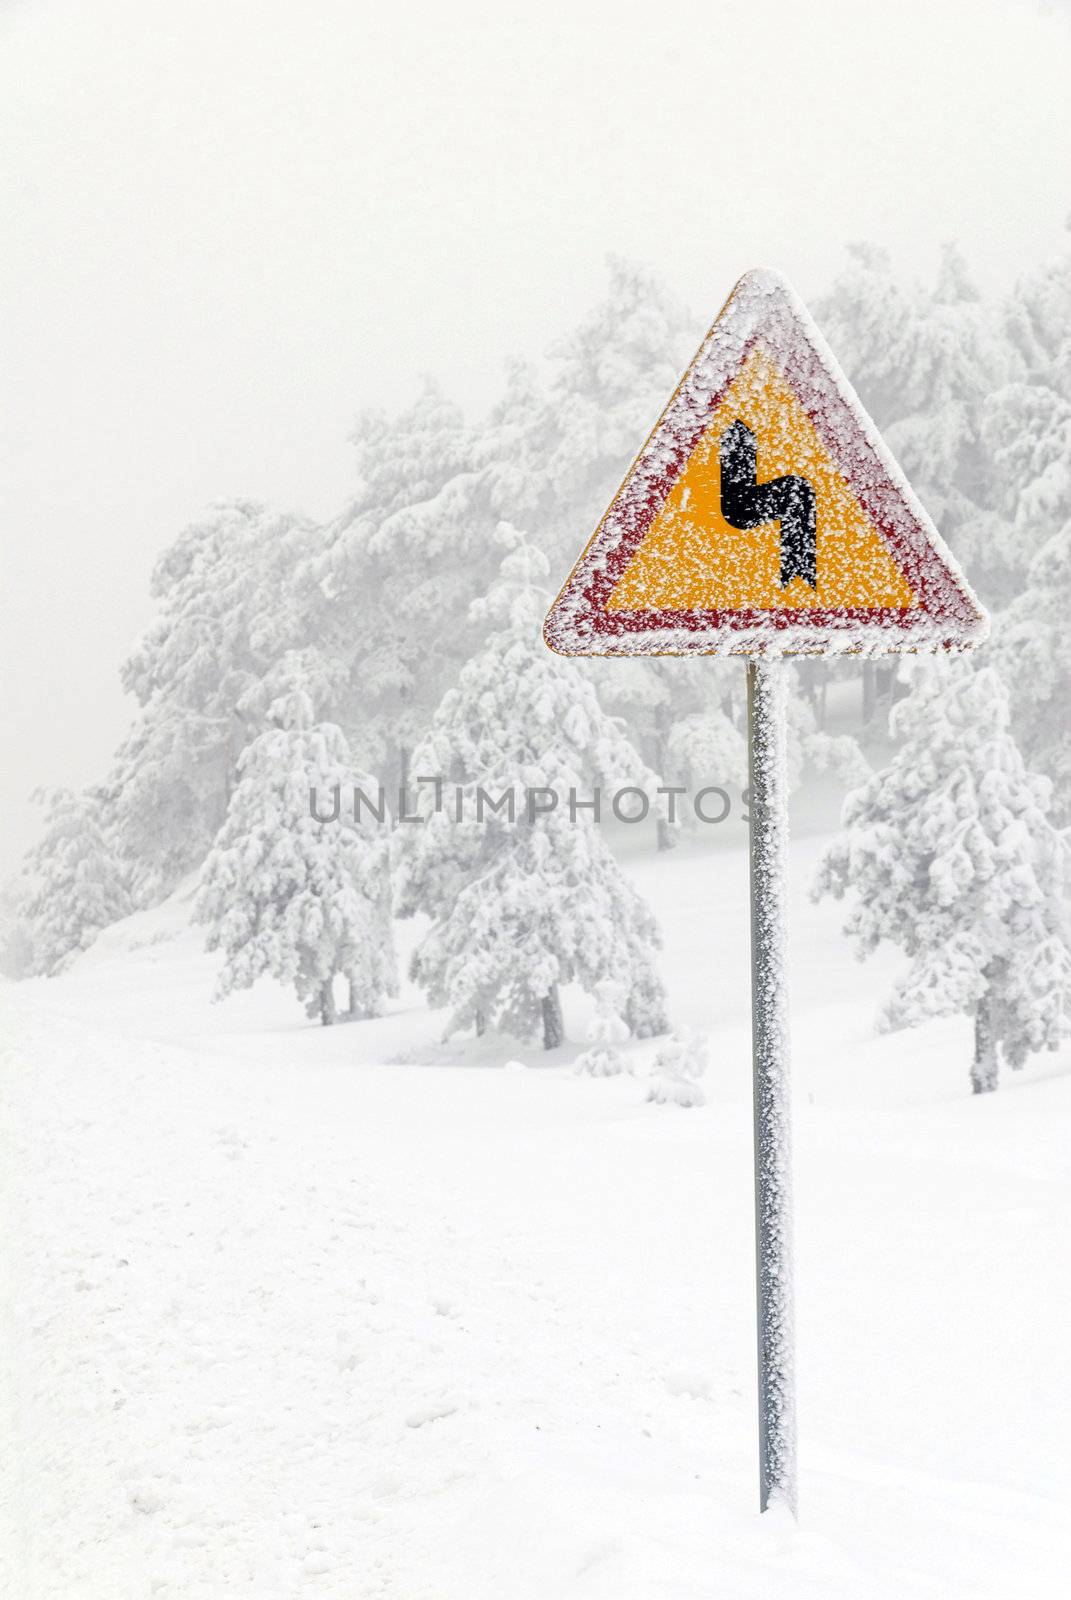 Traffic road sign in snow by adamr